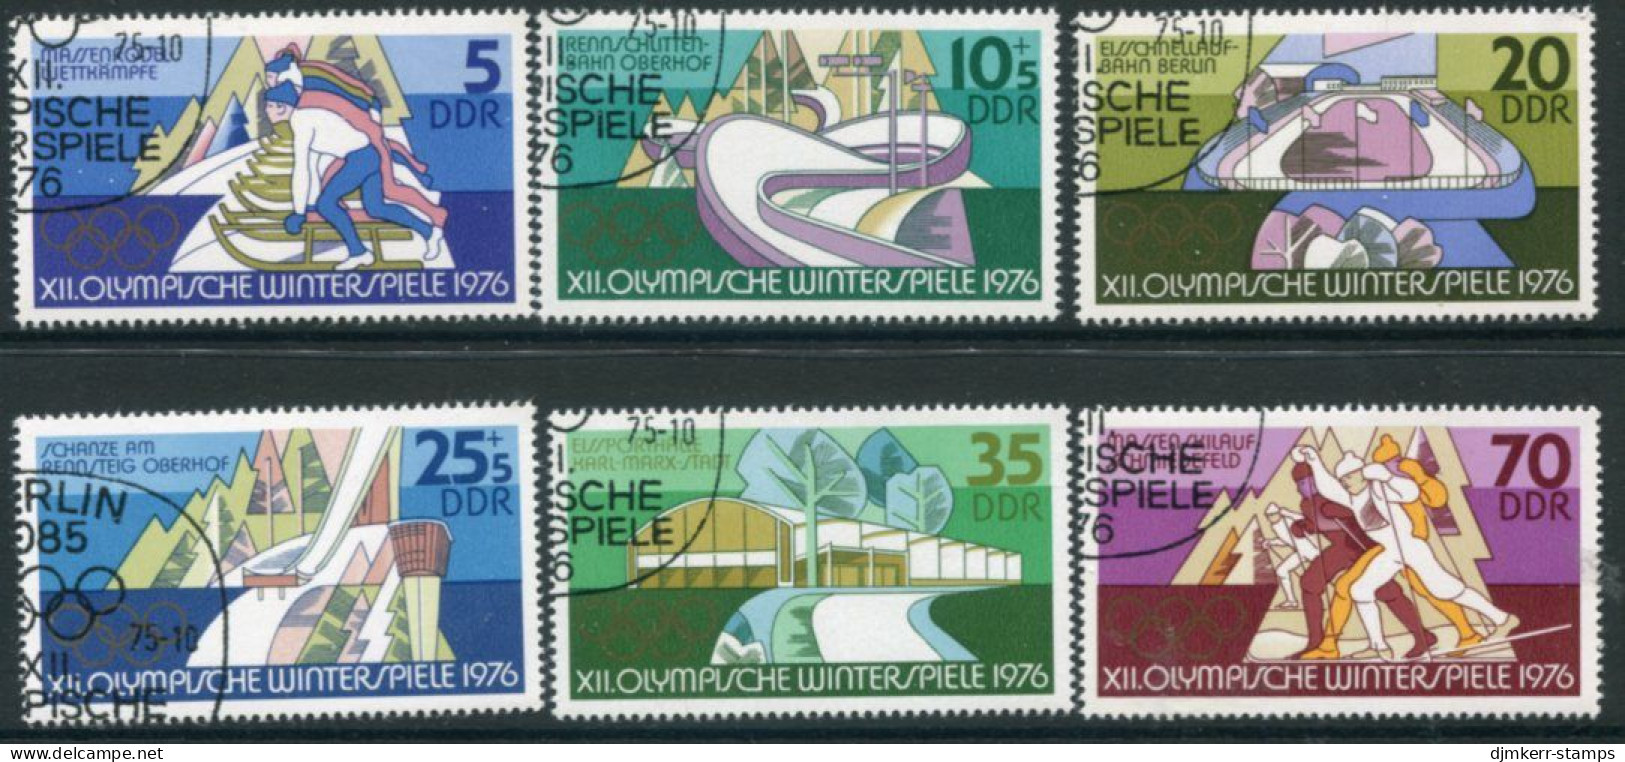 DDR / E. GERMANY 1975 Winter Olympic Games Used.  Michel 2099-104 - Oblitérés